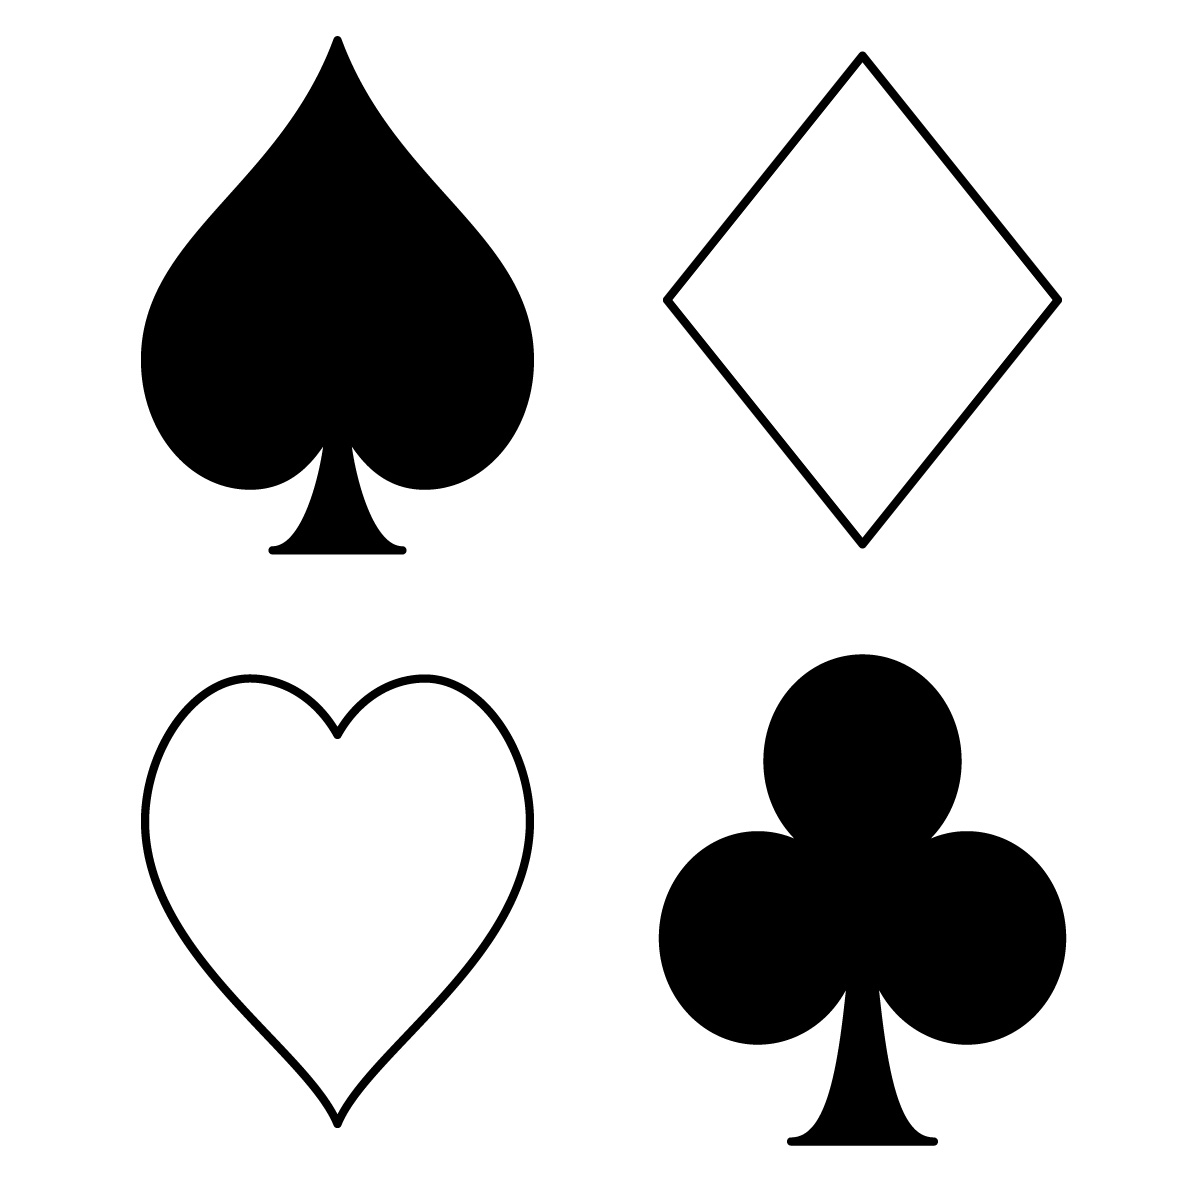 Playing Cards Clipart #7 - Clip Art Pin - ClipArt Best - ClipArt Best